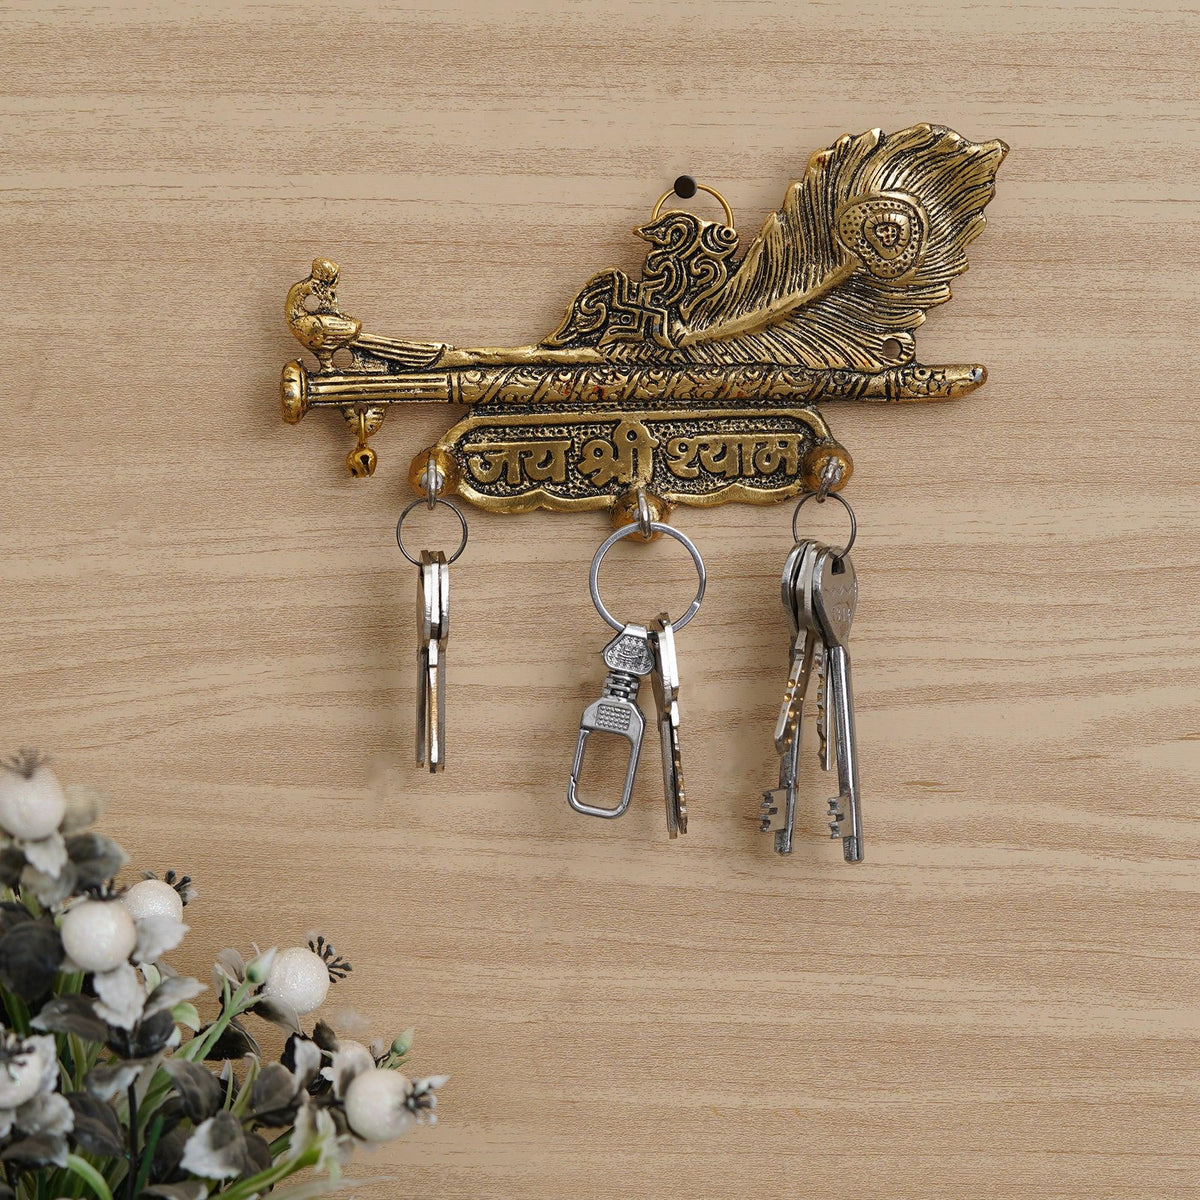 Vintage Brass Key Shaped Wall Hanging Key Holder with 5 Hooks Made in Taiwan